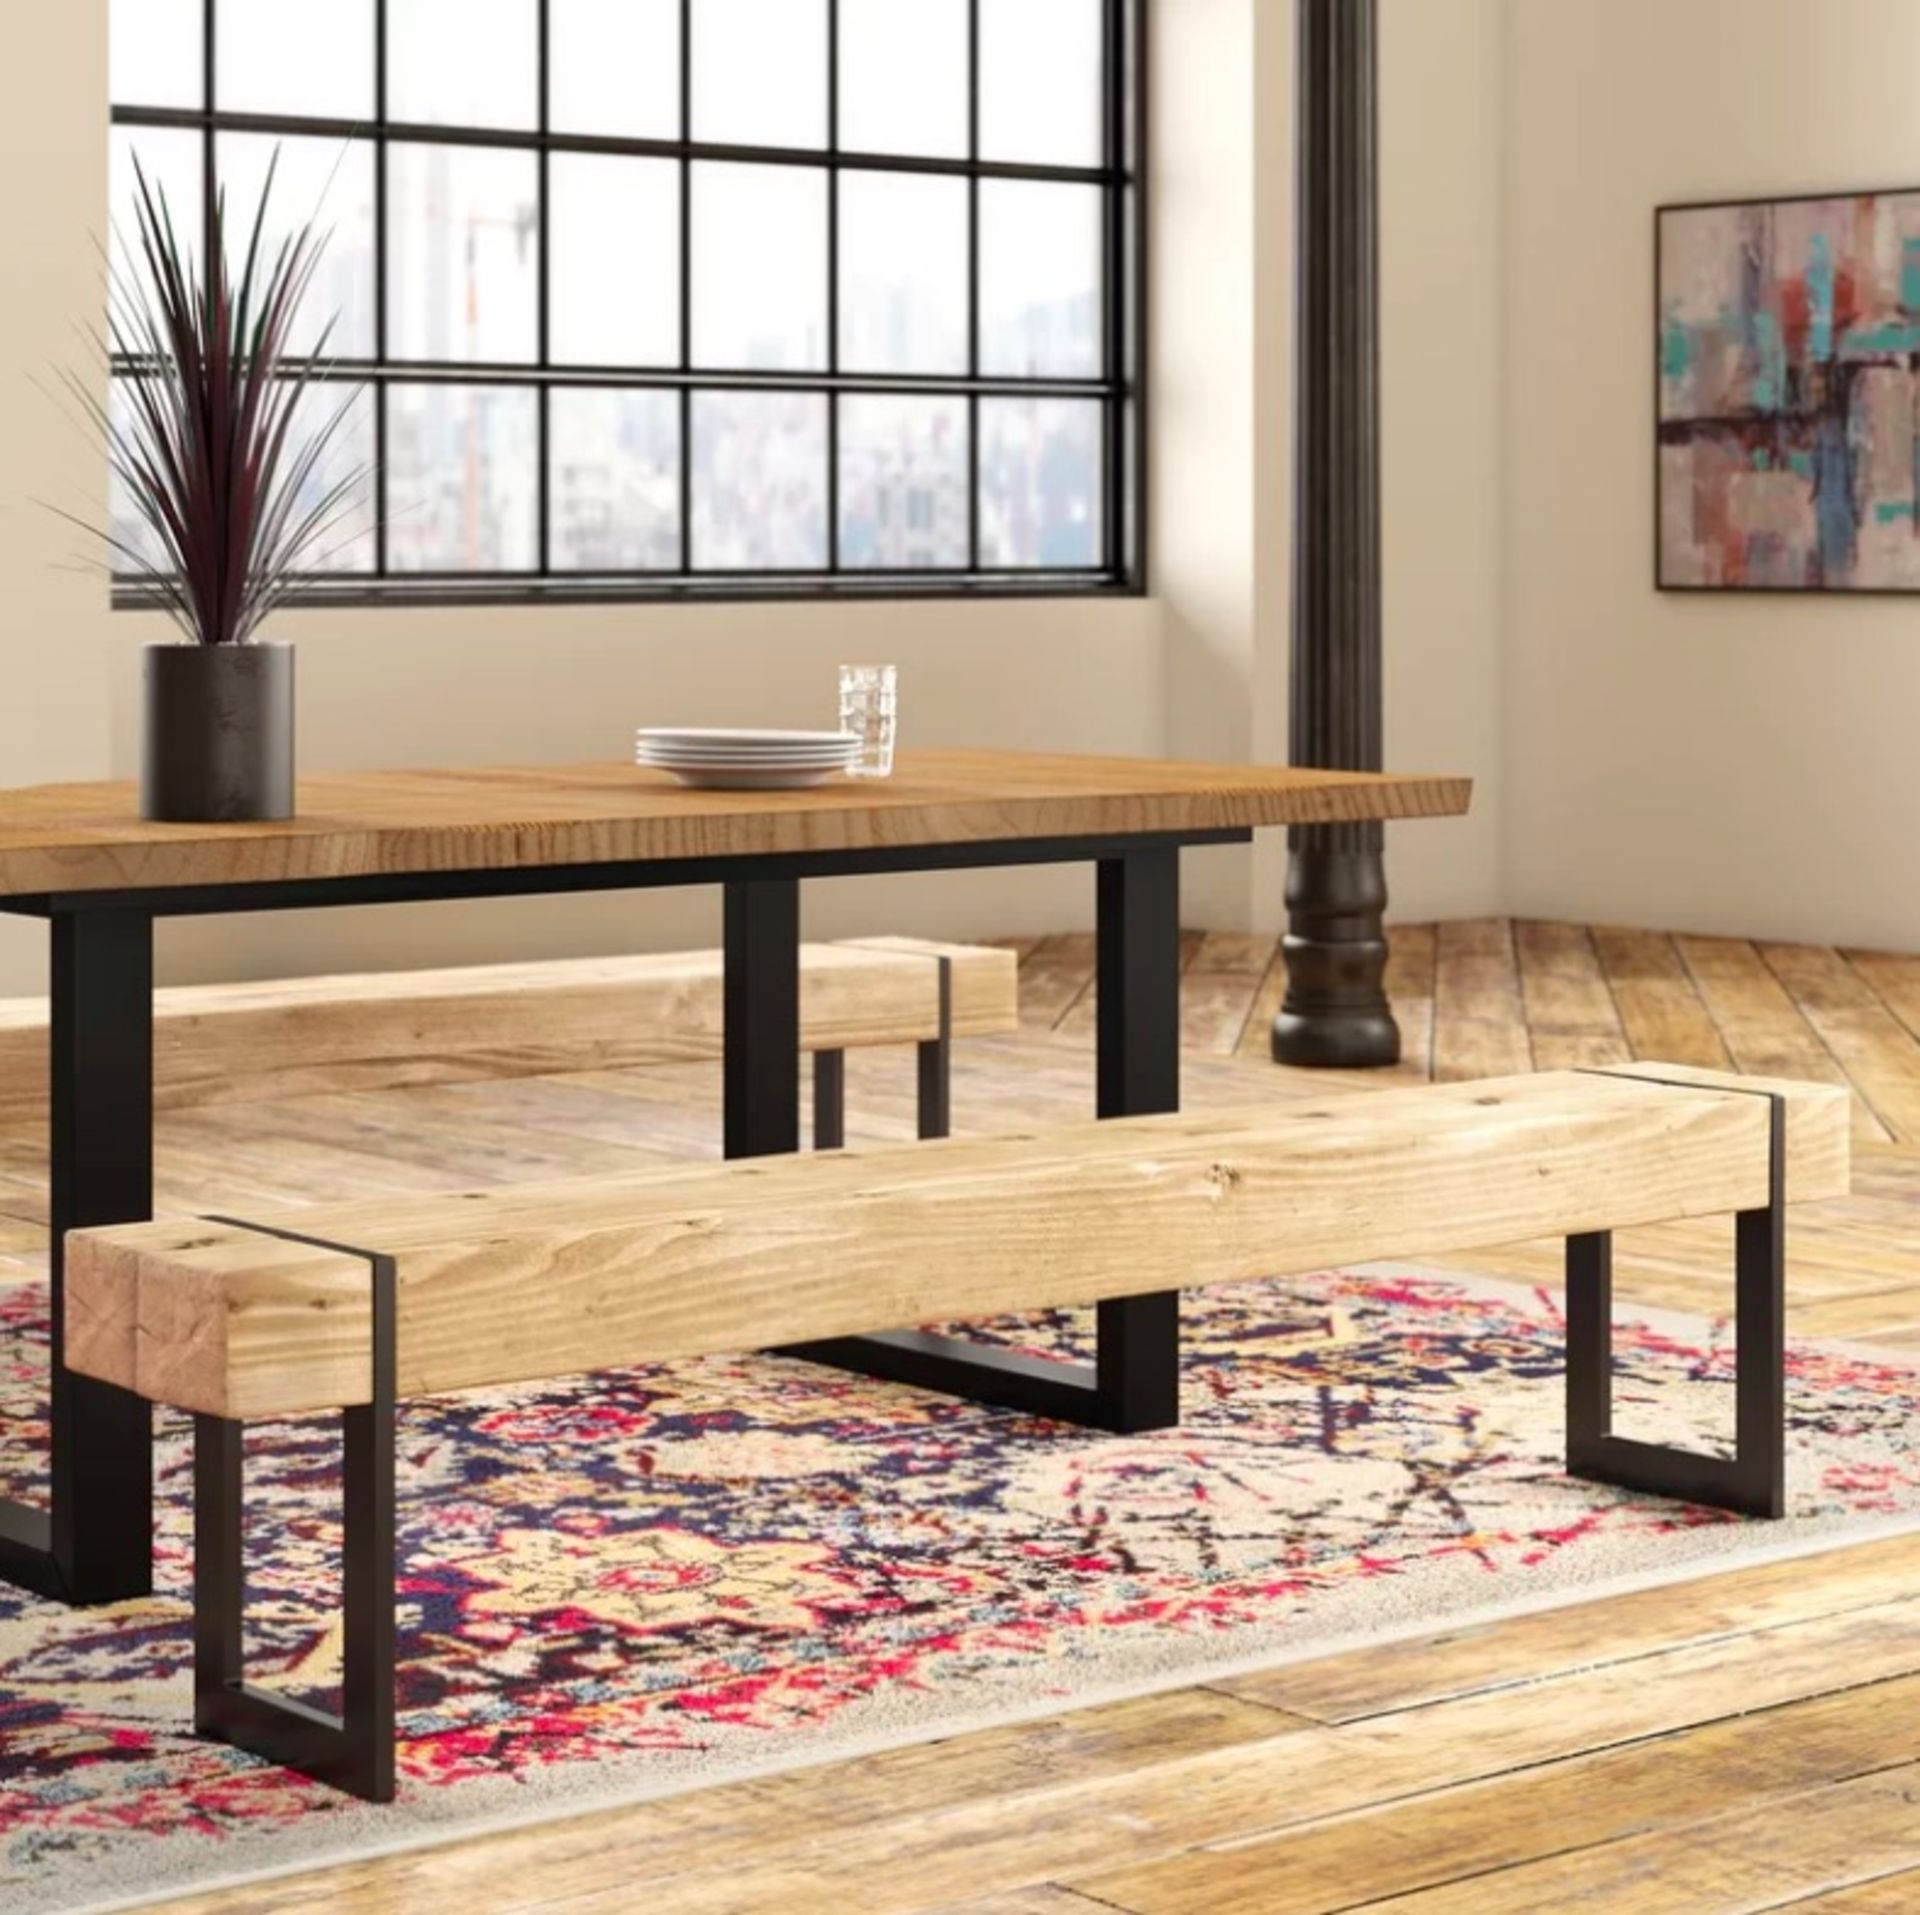 Iron Wooden Dining Bench Exposed And Raw Materials Give Your Home A Rugged On-Trend Look This